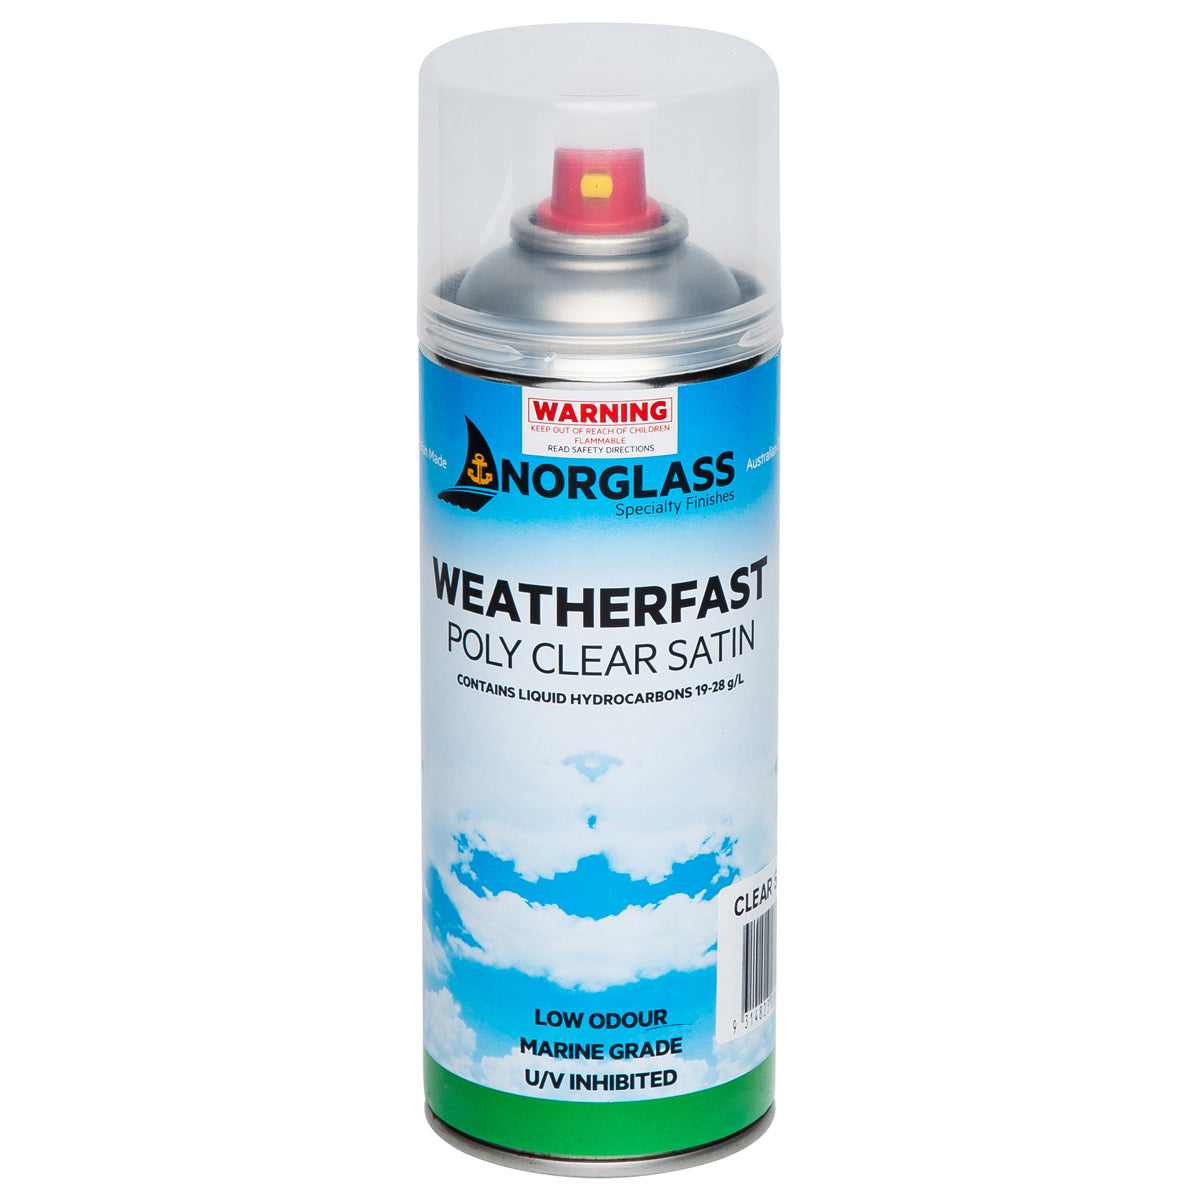 Norglass Weatherfast Poly Clear SATIN